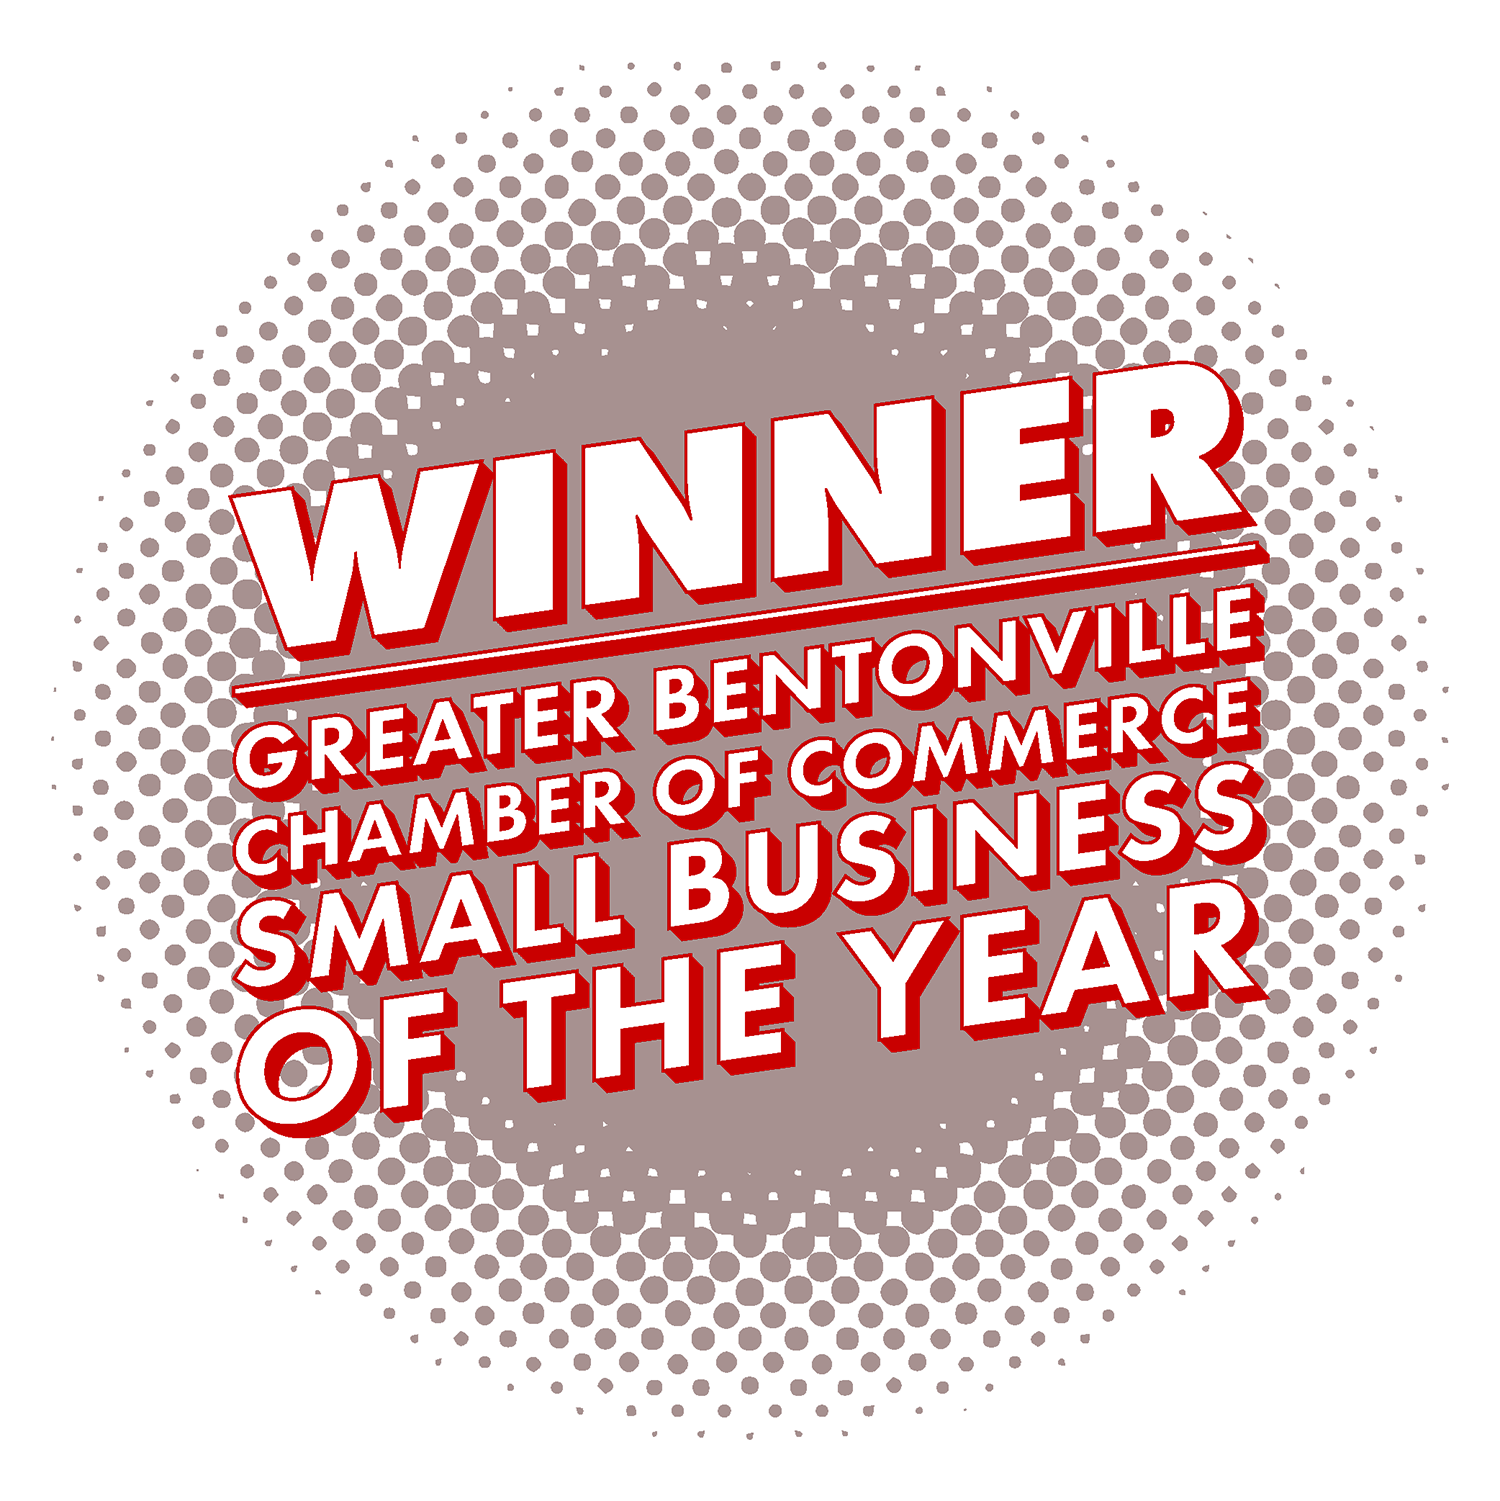 2022 Small Business of the Year Award Winner